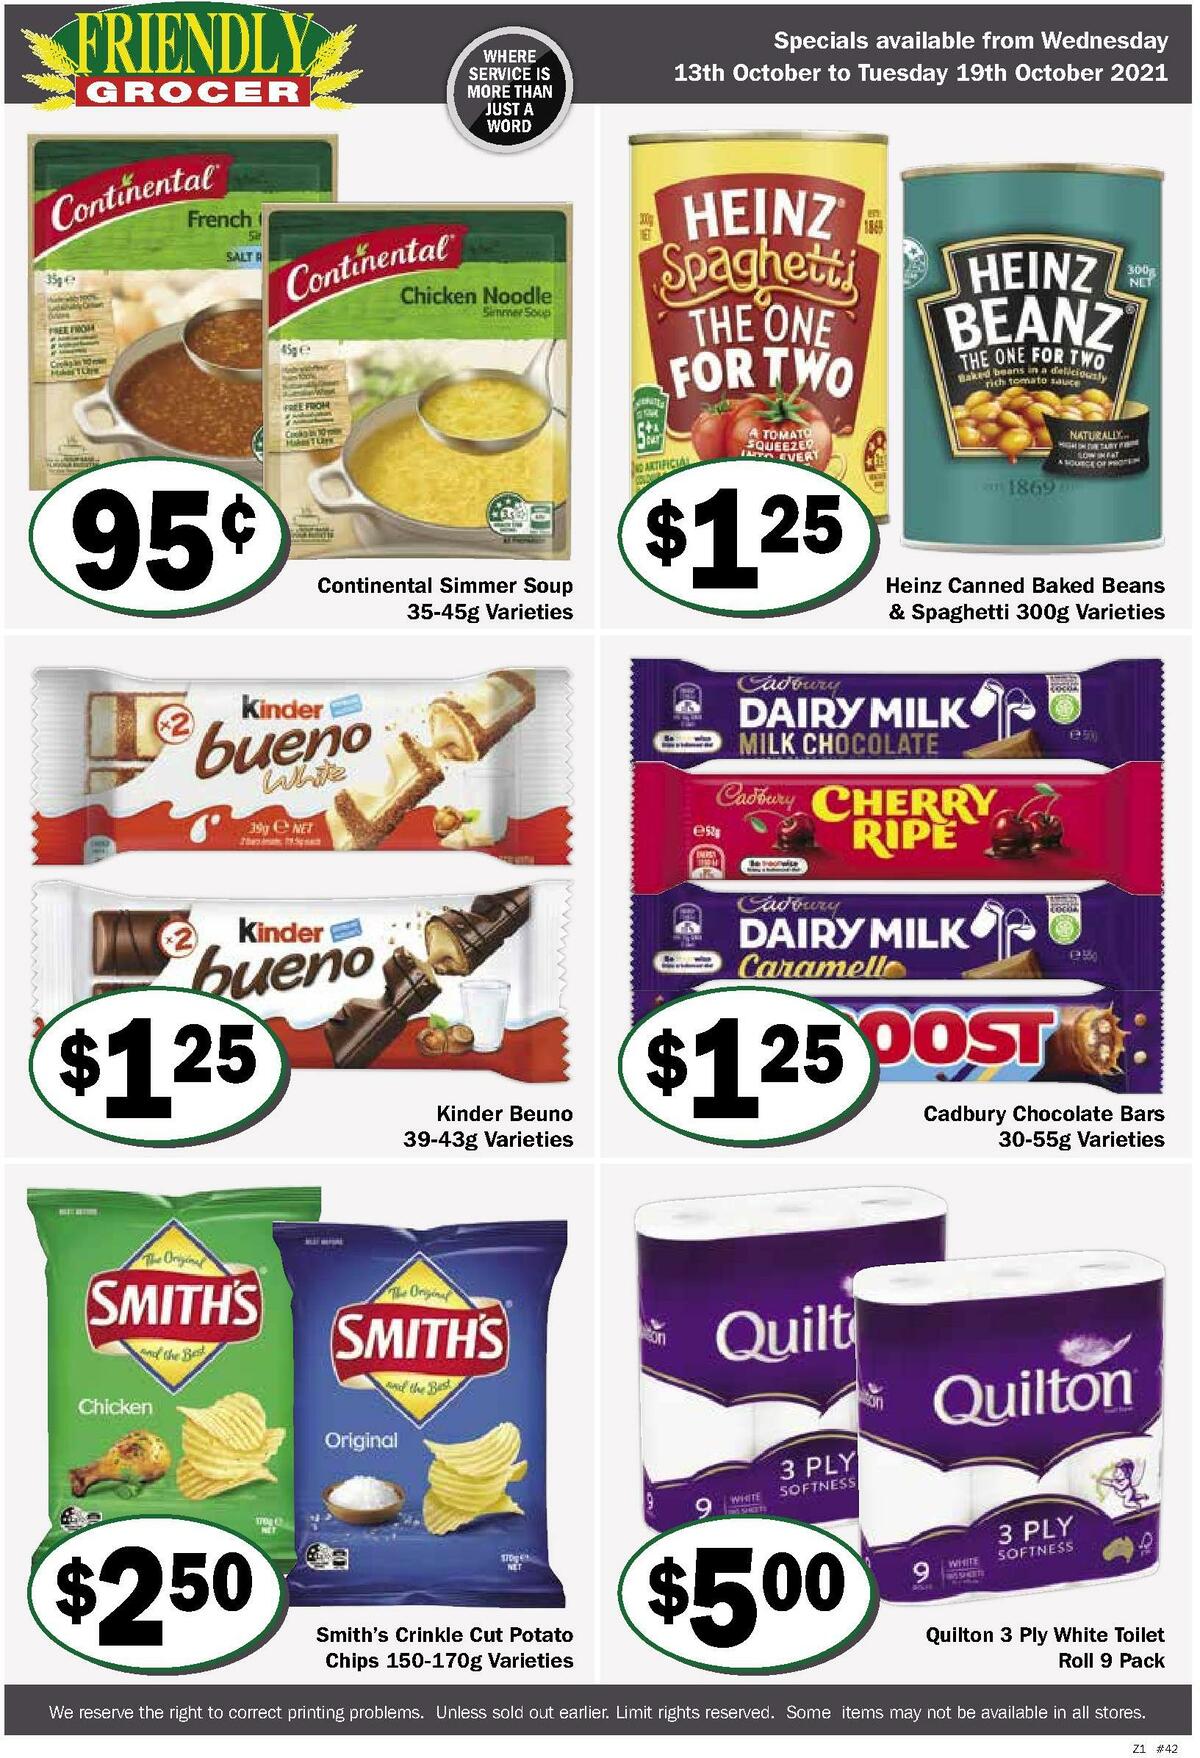 Friendly Grocer Catalogues from 13 October